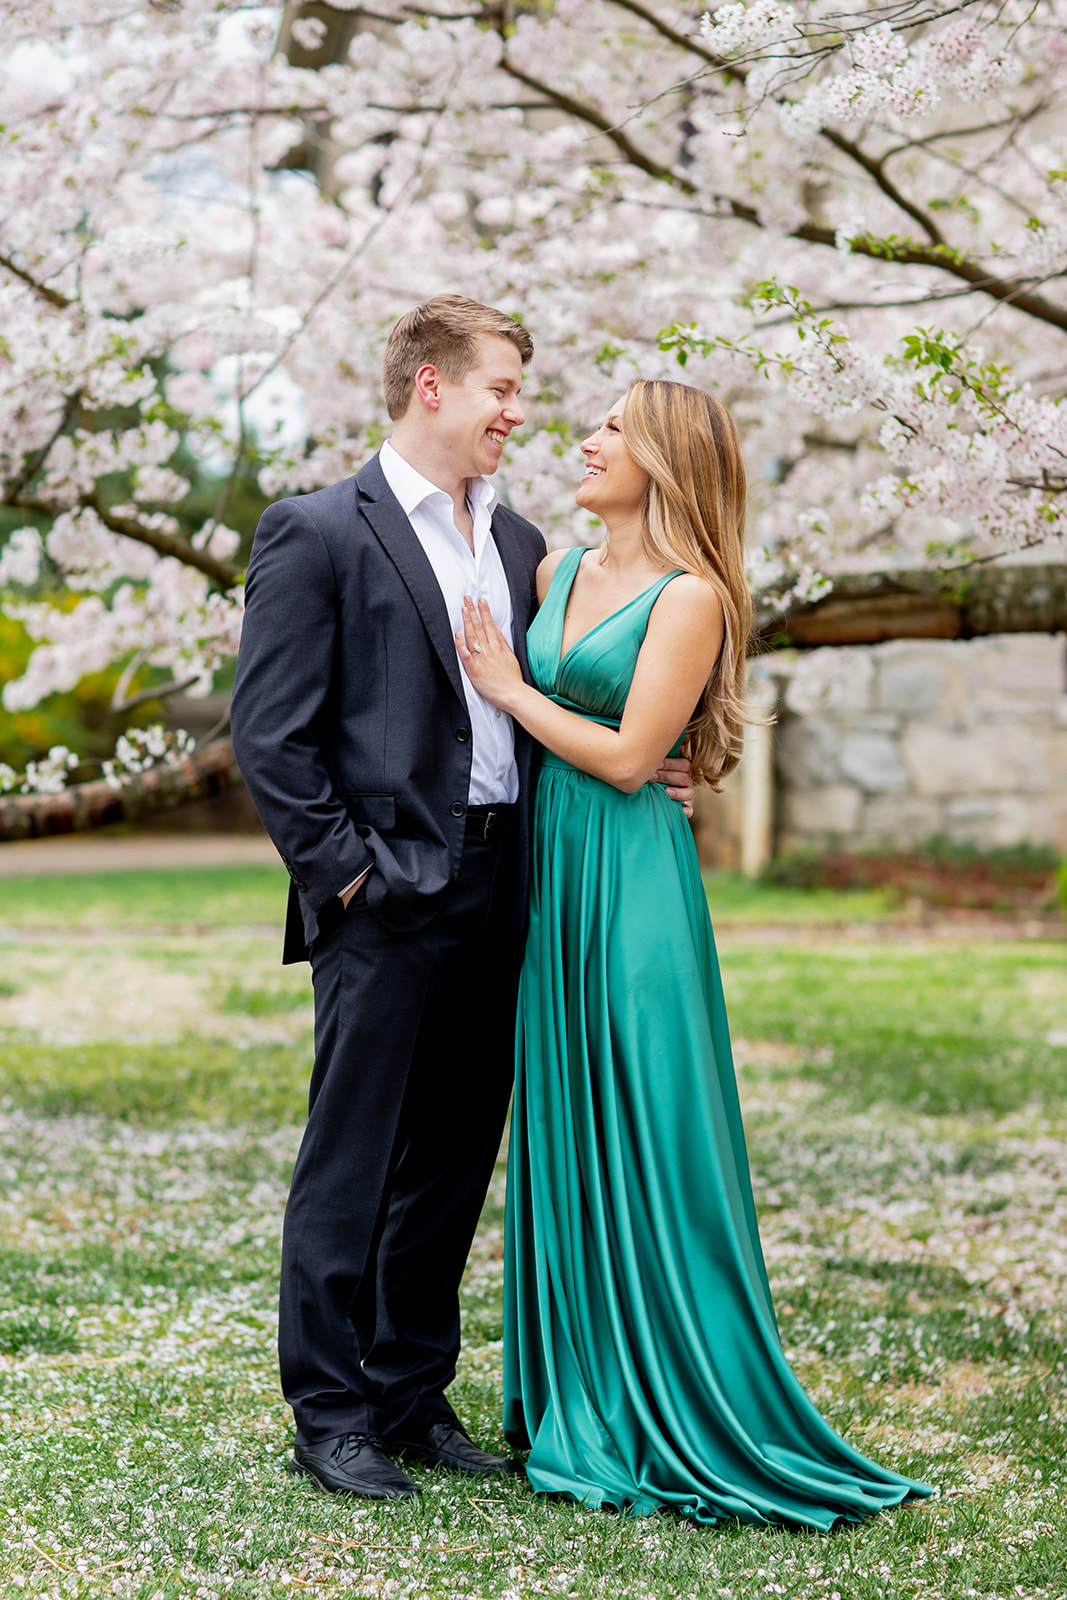 Spring Engagement Photos at Maymont - Image Property of www.j-dphoto.com